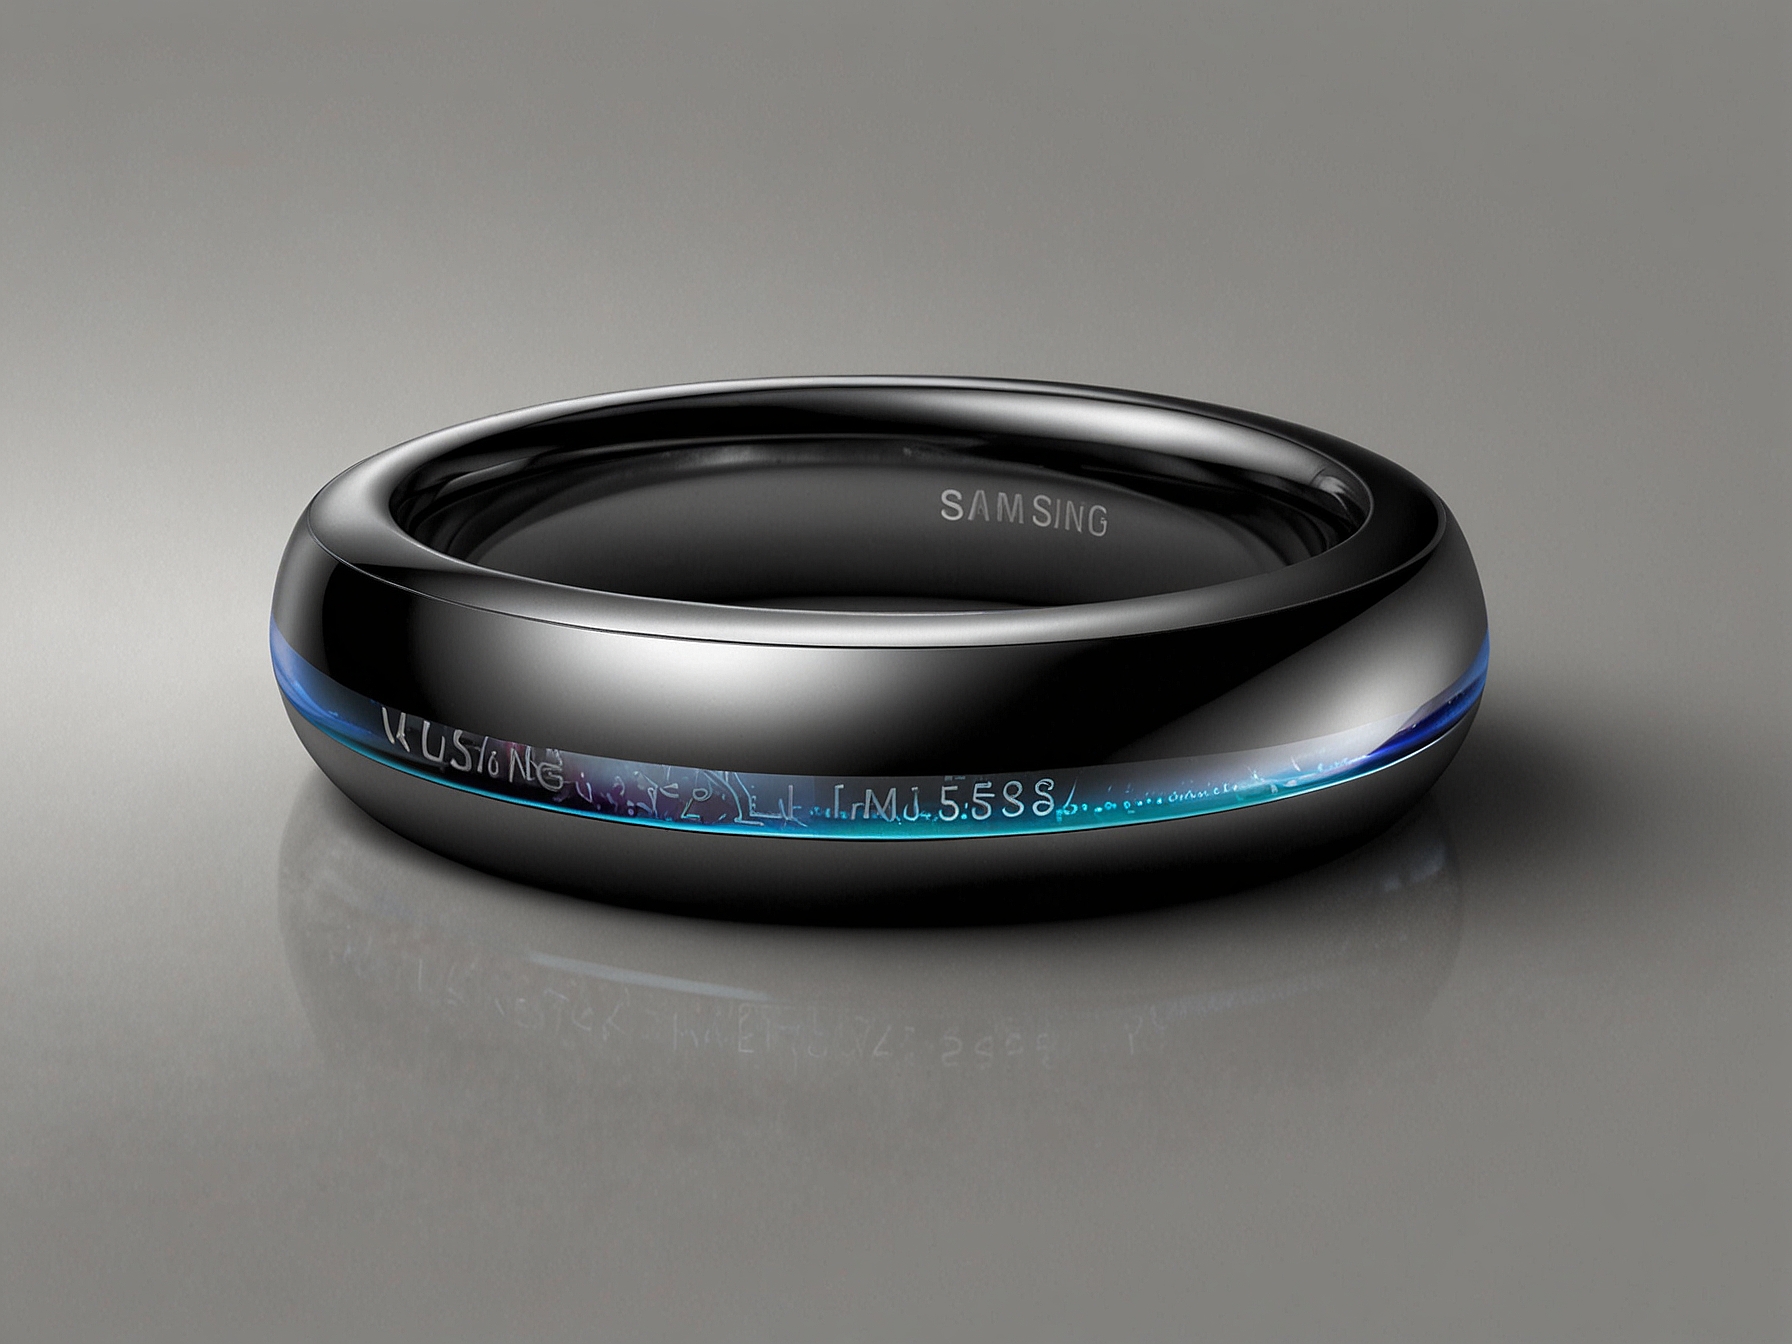 An artist's impression of the anticipated Samsung Galaxy Ring showcasing its sleek design and innovative technology.